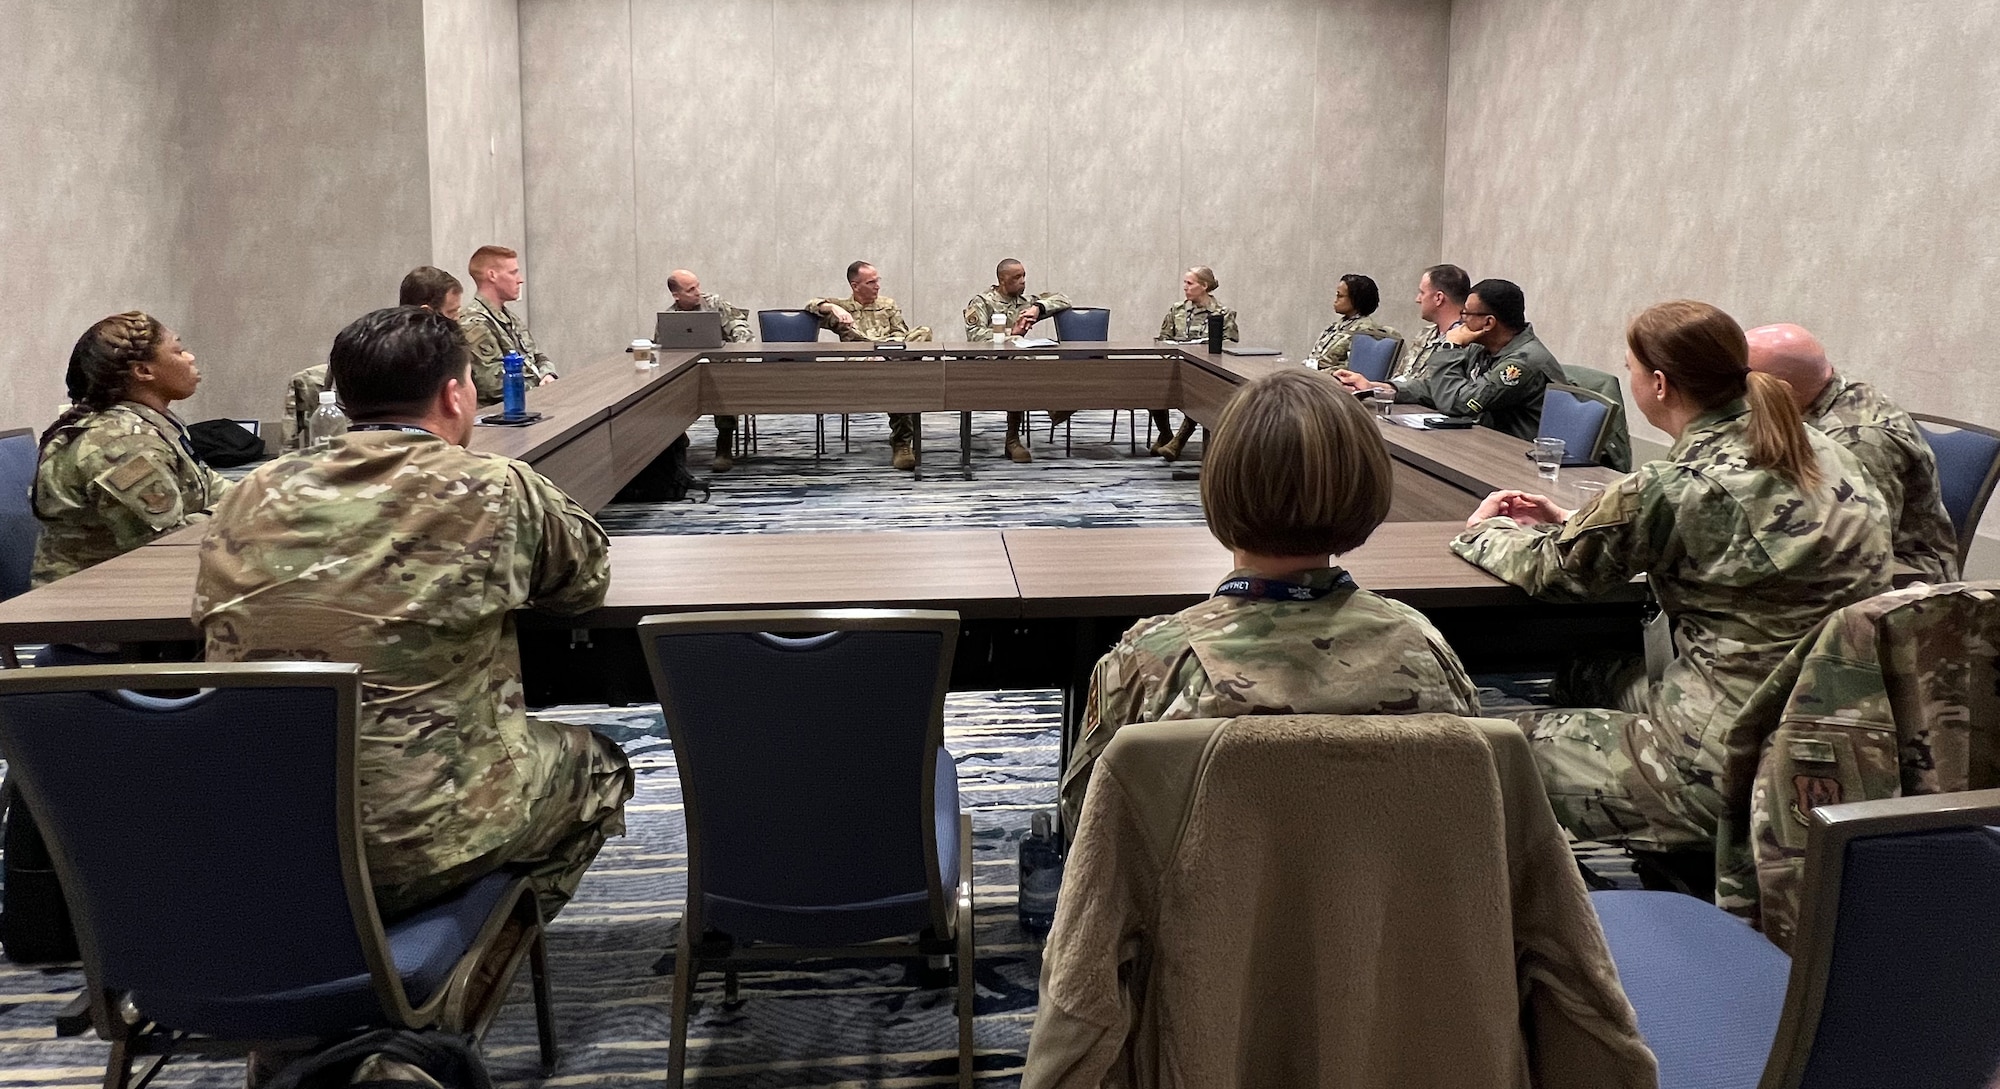 Lt. Gen. John Healy, chief of the Air Force Reserve, and Chief Master Sgt. Timothy White, senior enlisted advisor to the chief of the Air Force Reserve, sat down with the Reserve Council and shared their perspective on top priorities, current challenges, and opportunities for the Air Force Reserve.